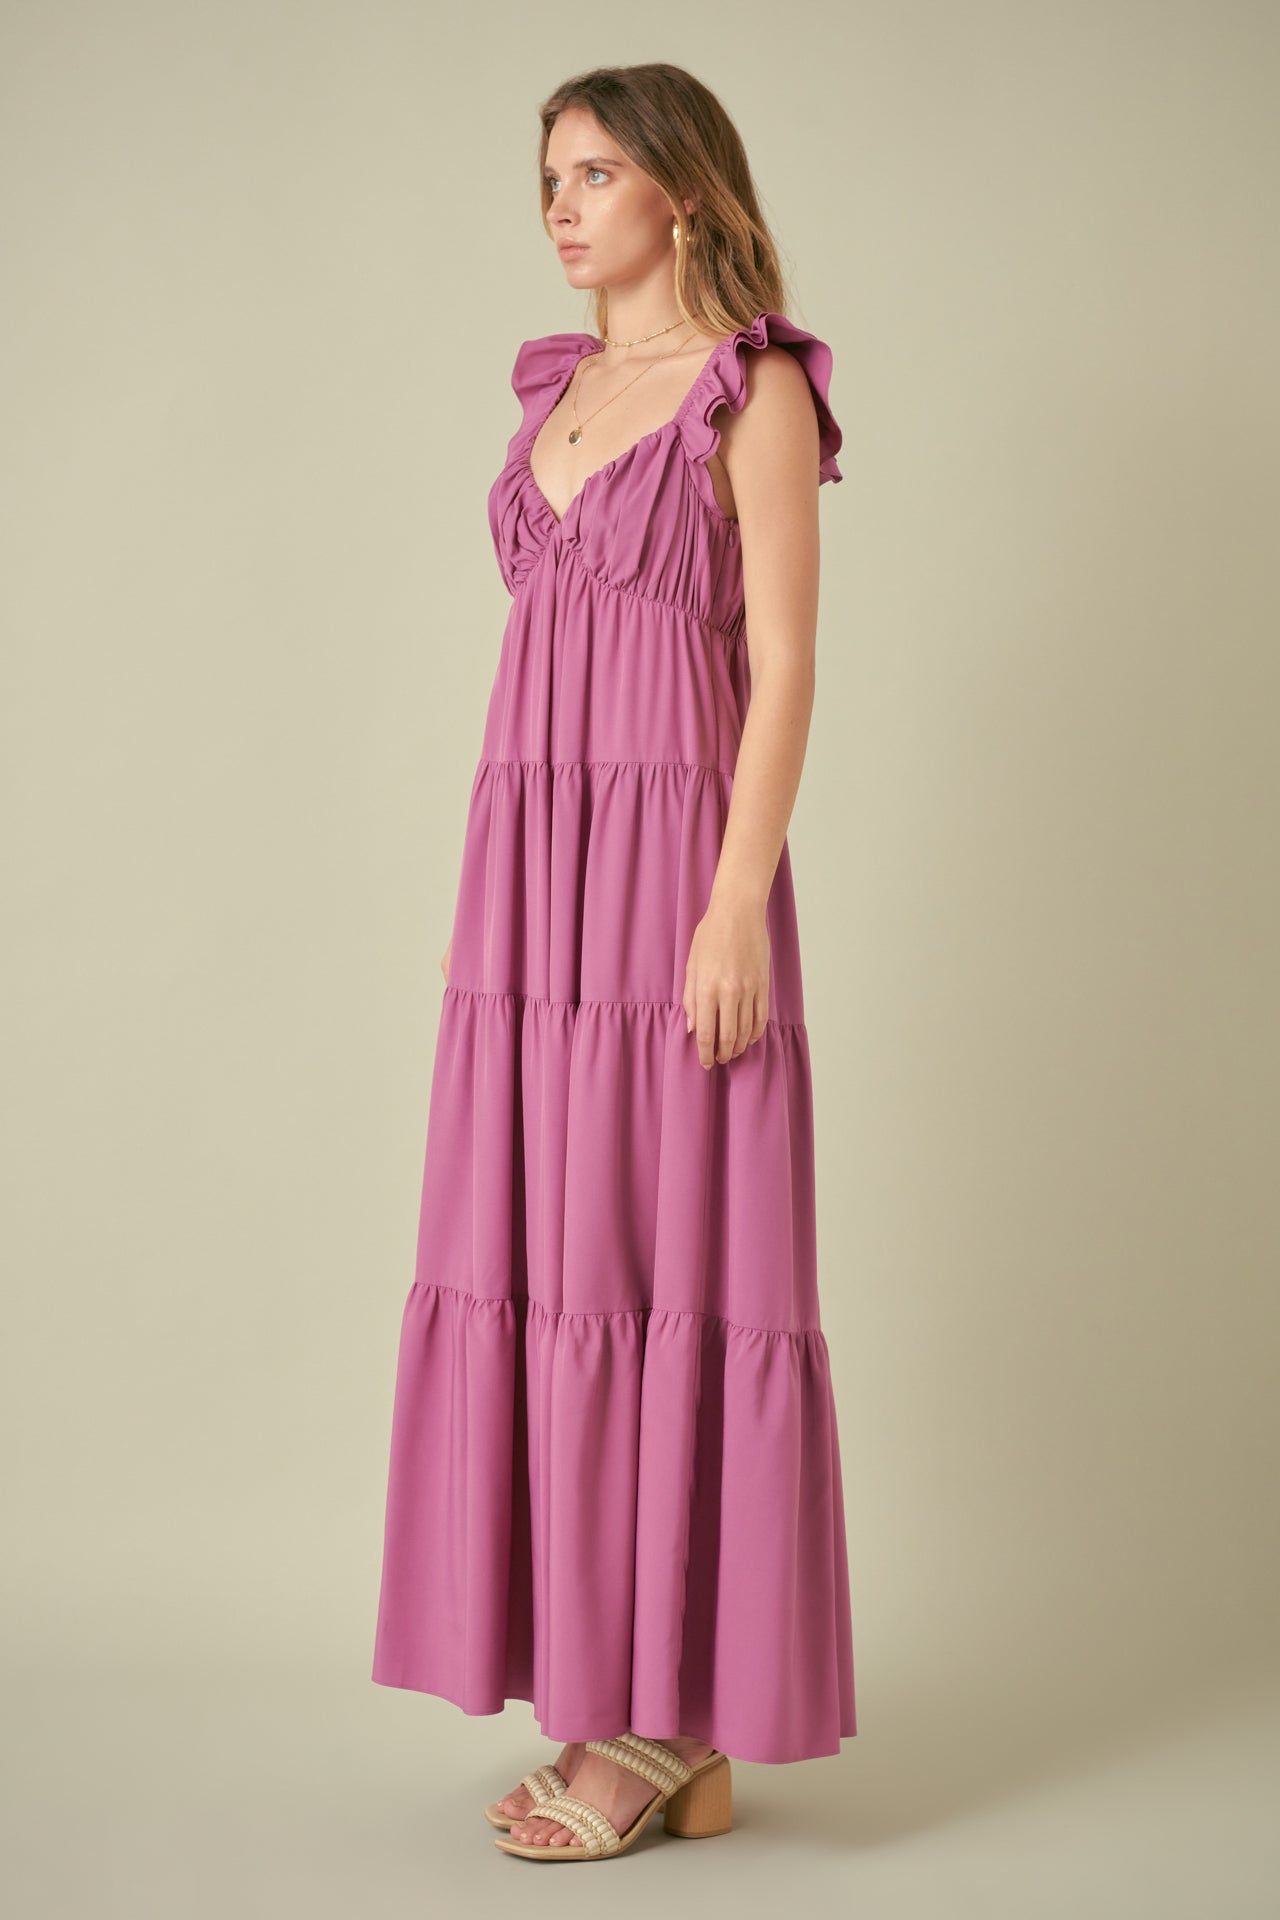 FREE THE ROSES - Ruffle Sleeve Maxi Dress - DRESSES available at Objectrare